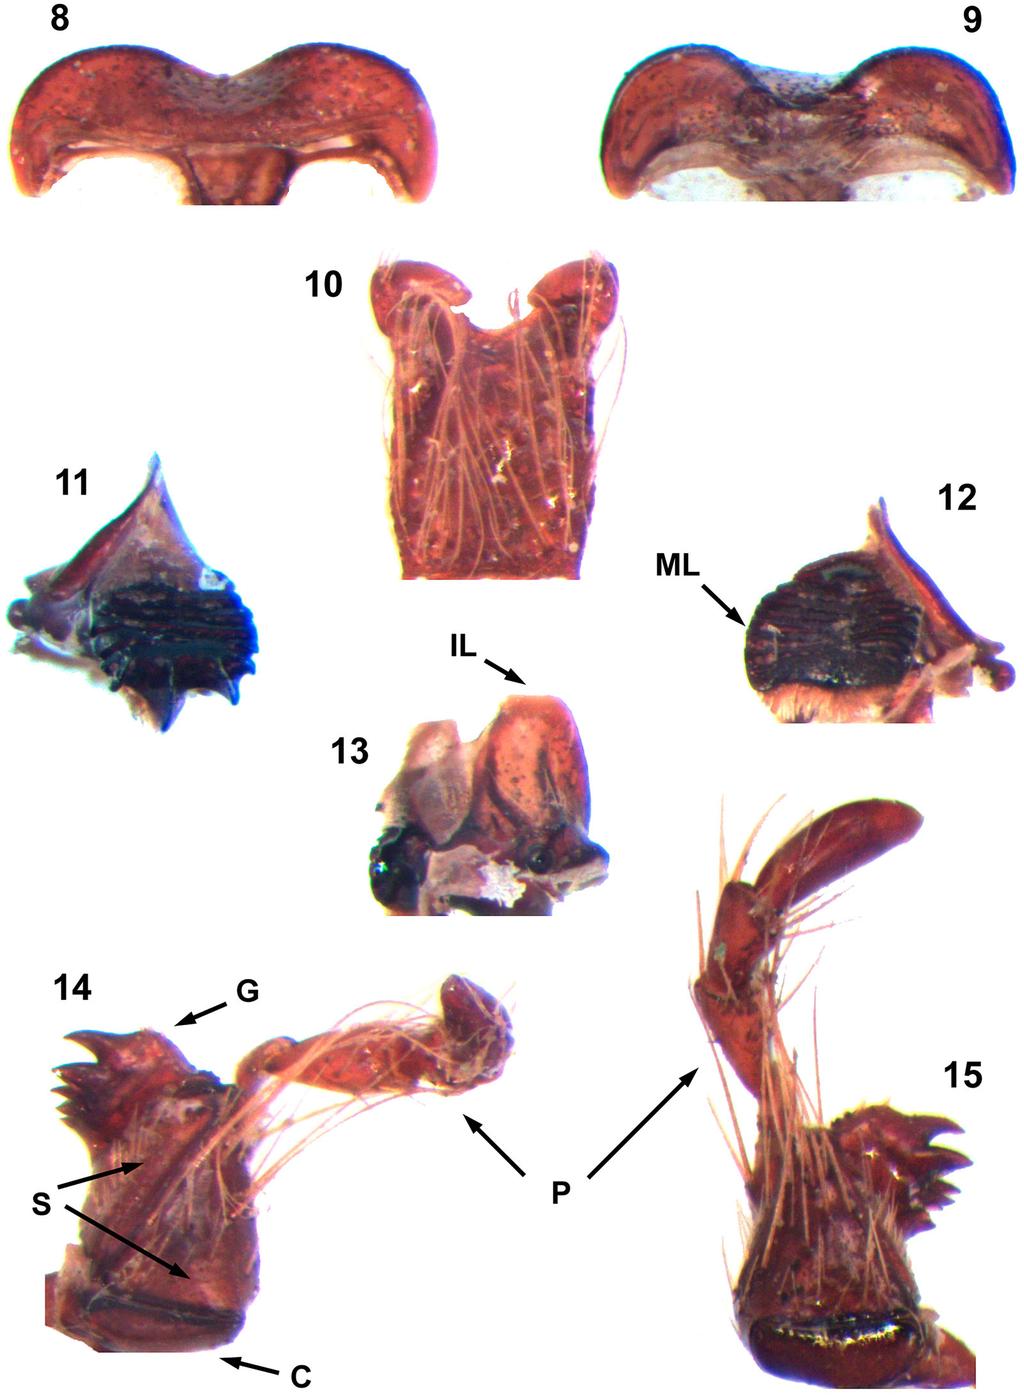 NEW ZEALAND ENTOMOLOGIST 7 Figures 8 15. Mouth parts of Costelytra zealandica (Lectotype ). Labrum in dorsal (8) and ventral (9) view. Mentum in ventral view (10).